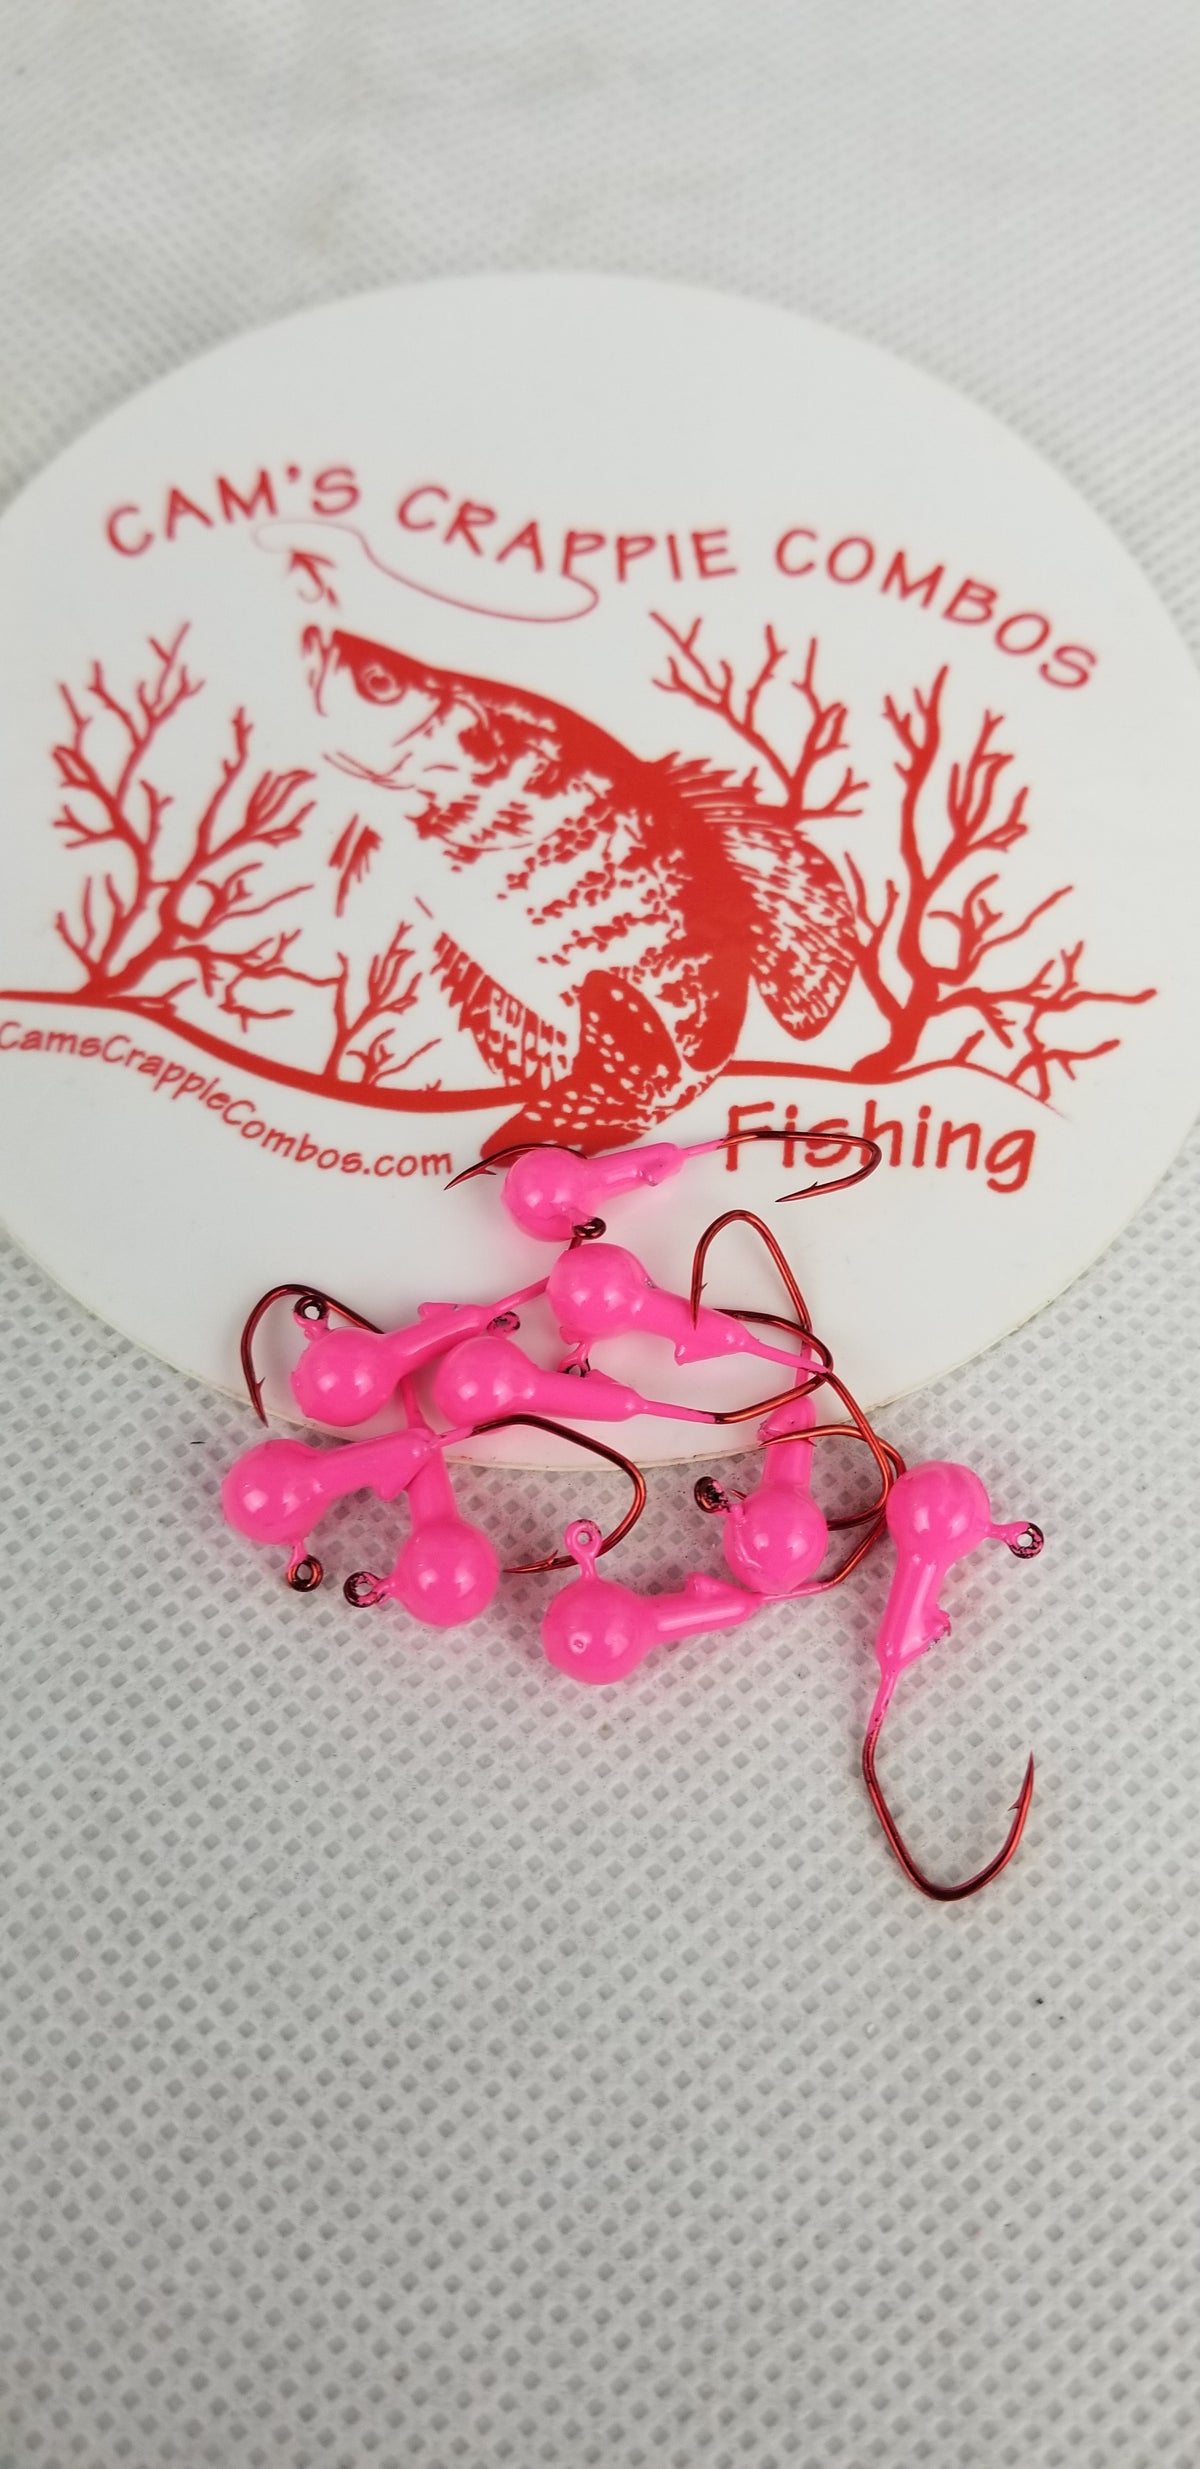 40 pk. 1/32 oz. Cam's "PINK" Painted jigs with Collar and #2 Red Chrome "NASTY BEND HOOK"